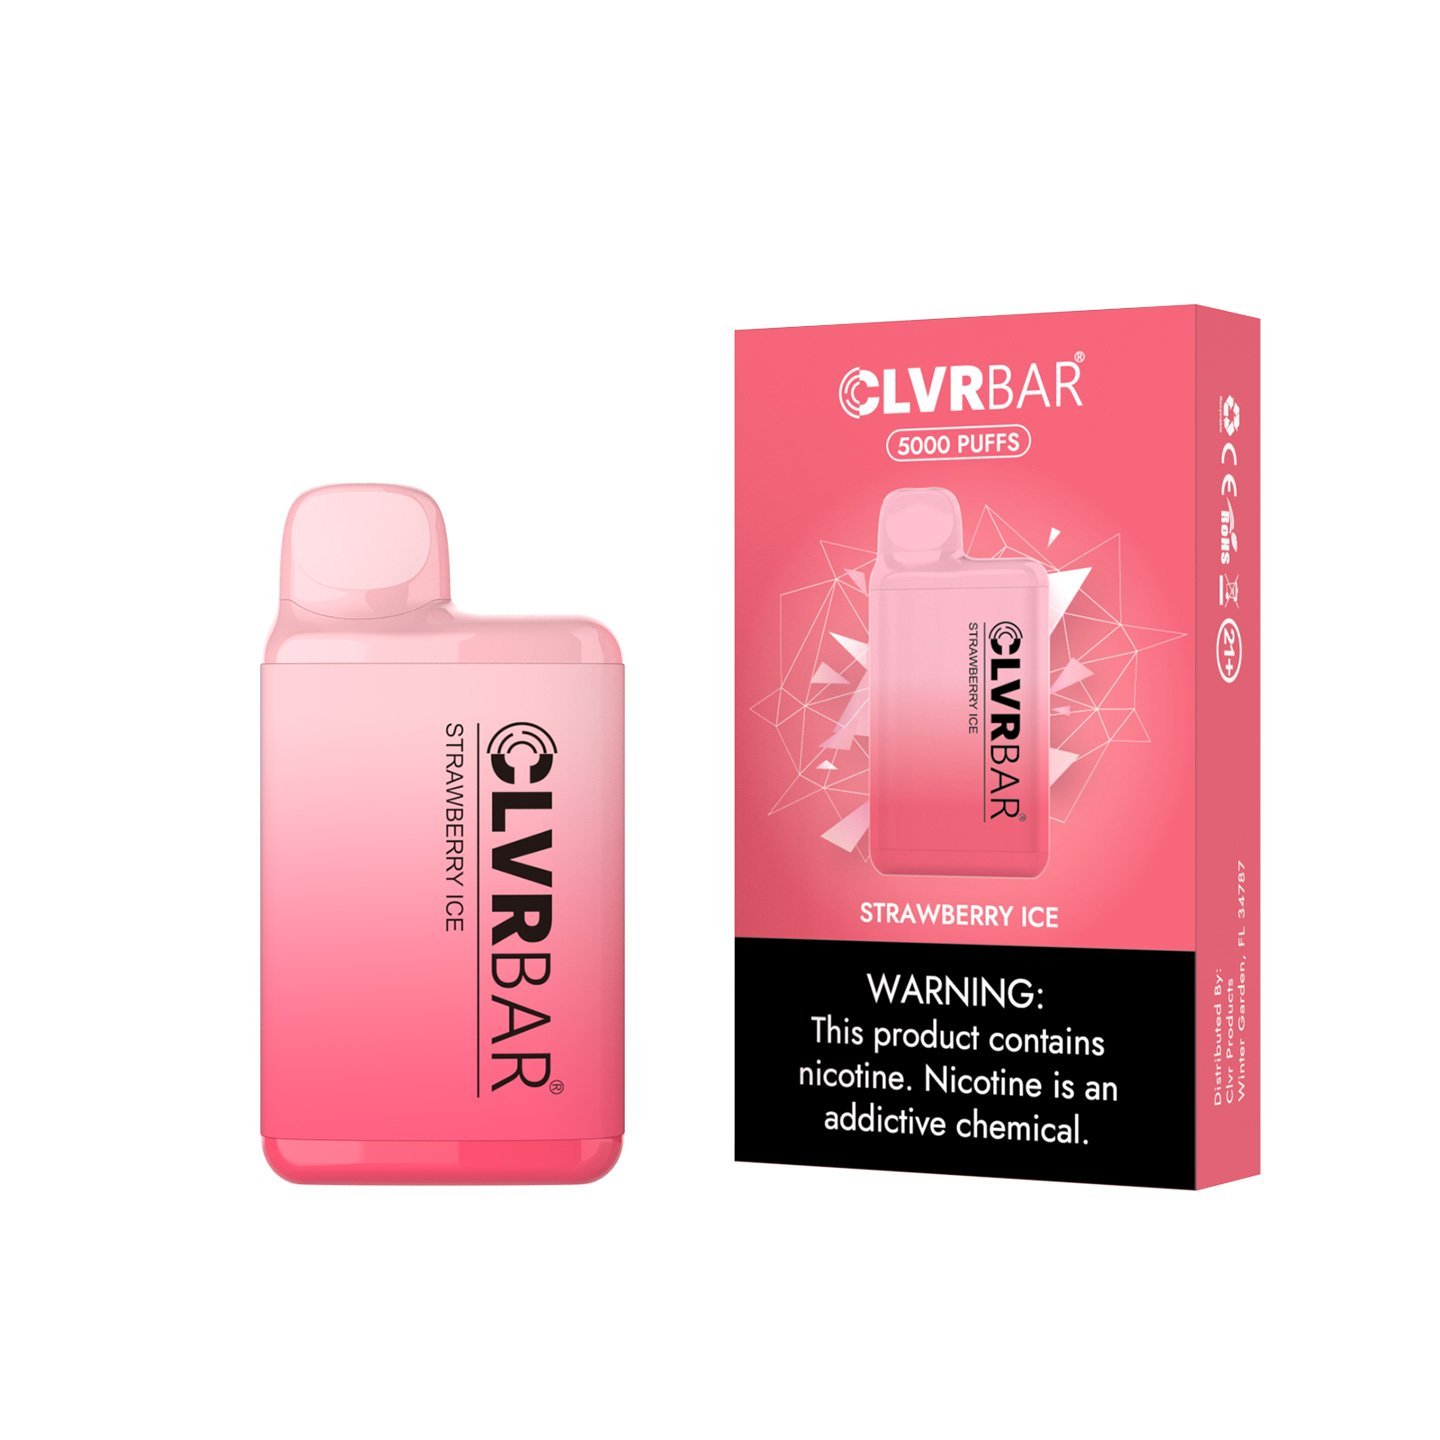 CLVRBAR Disposable Device (Strawberry Ice - 5000 Puffs)